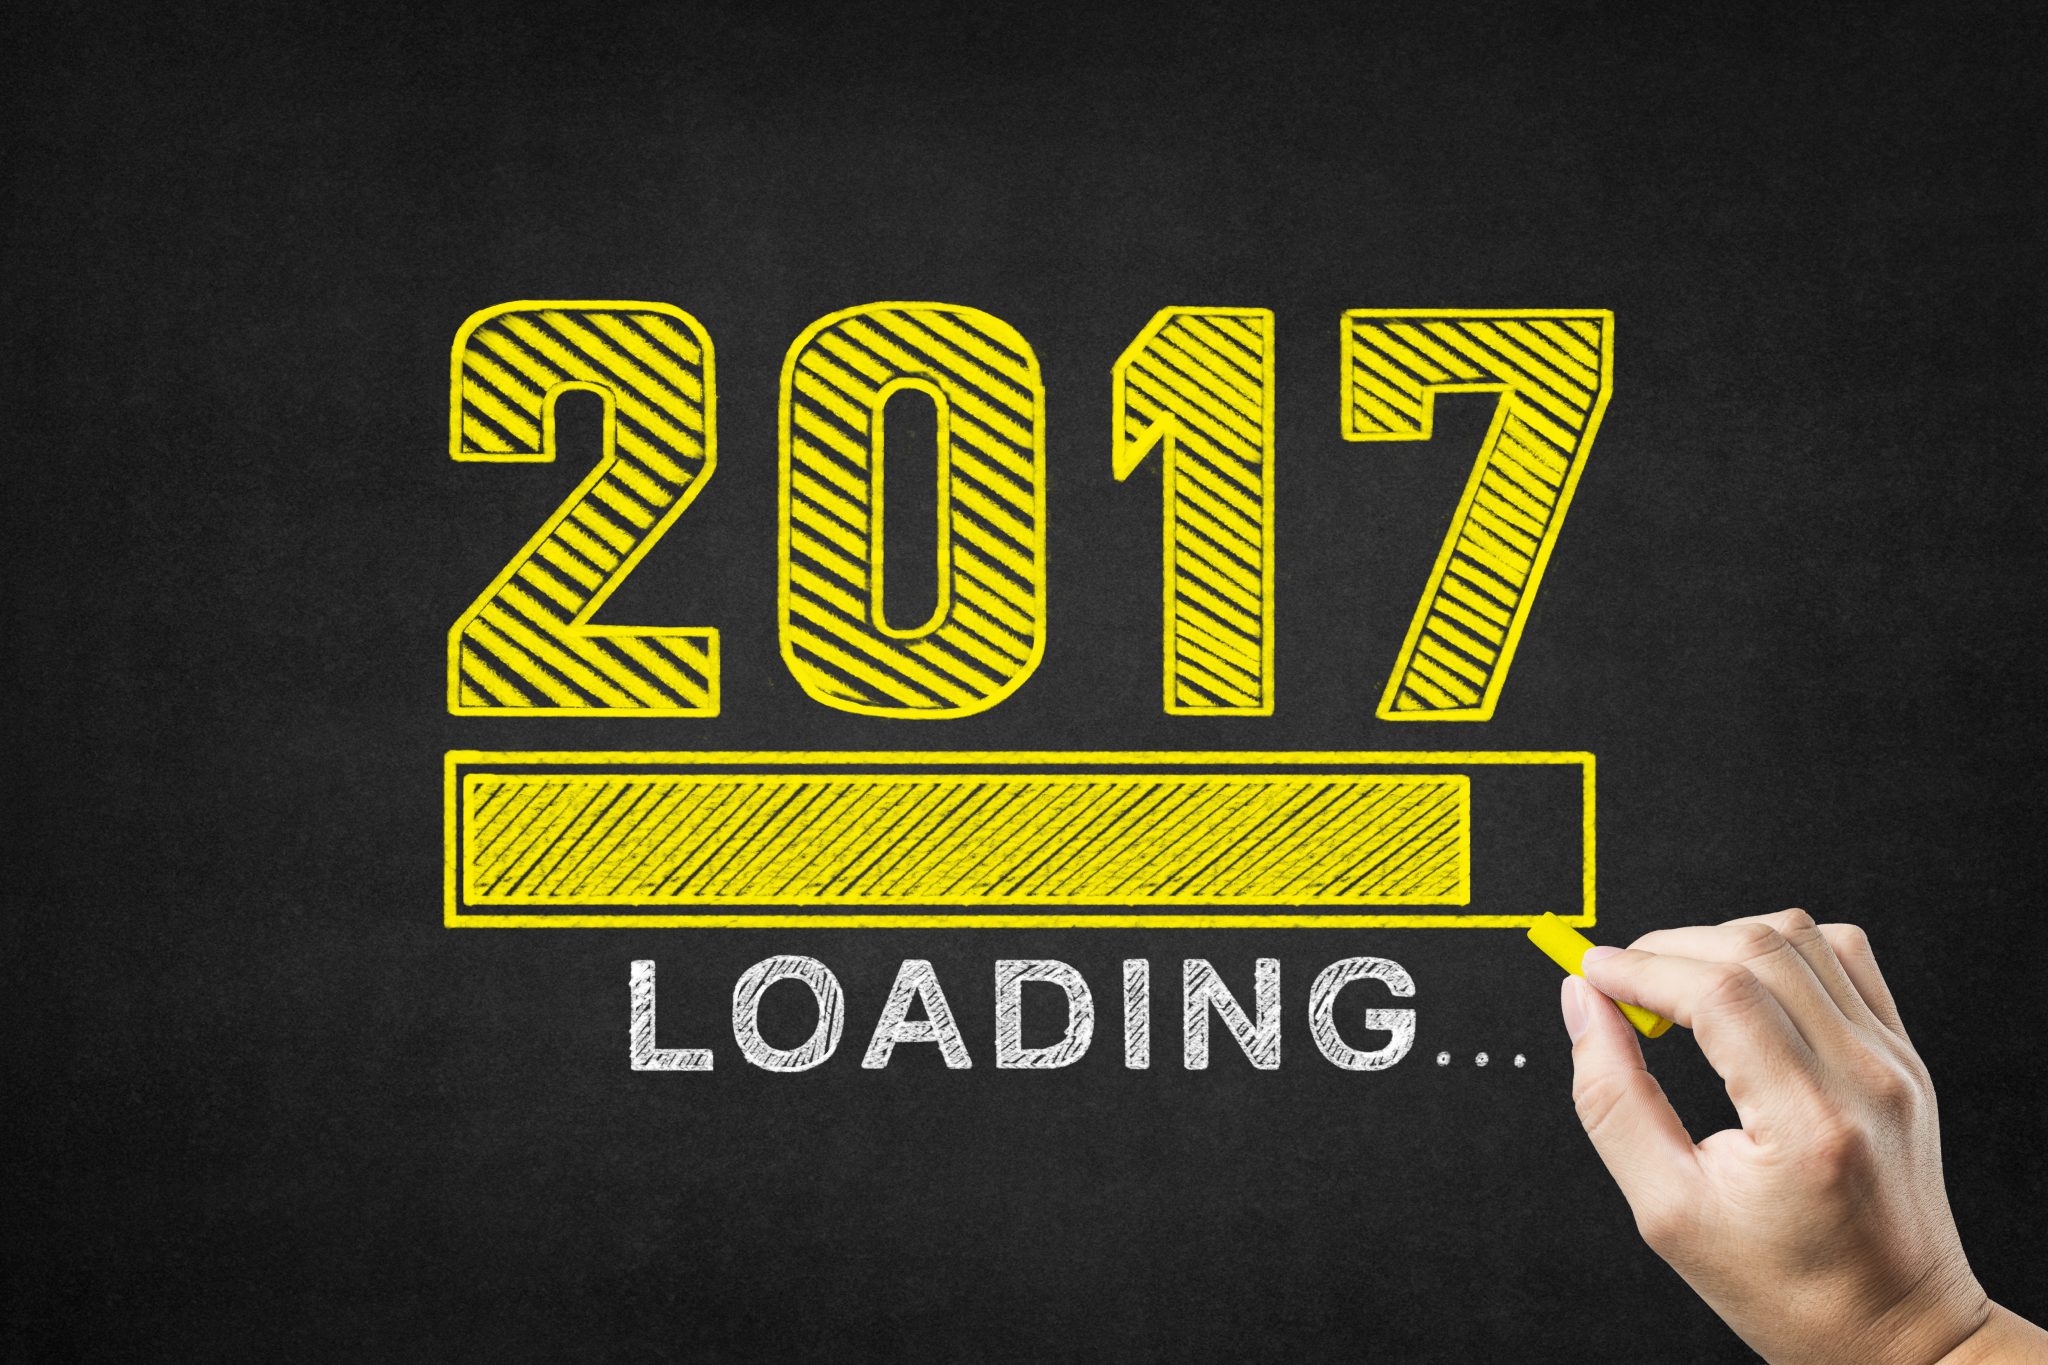 What Happened To Bitcoin In 2017 / Bitcoin Predictions for 2017 | Investopedia - After an unprecedented boom in 2017, the price of bitcoin fell by about 65 percent during the month from 6 january to 6 february 2018.